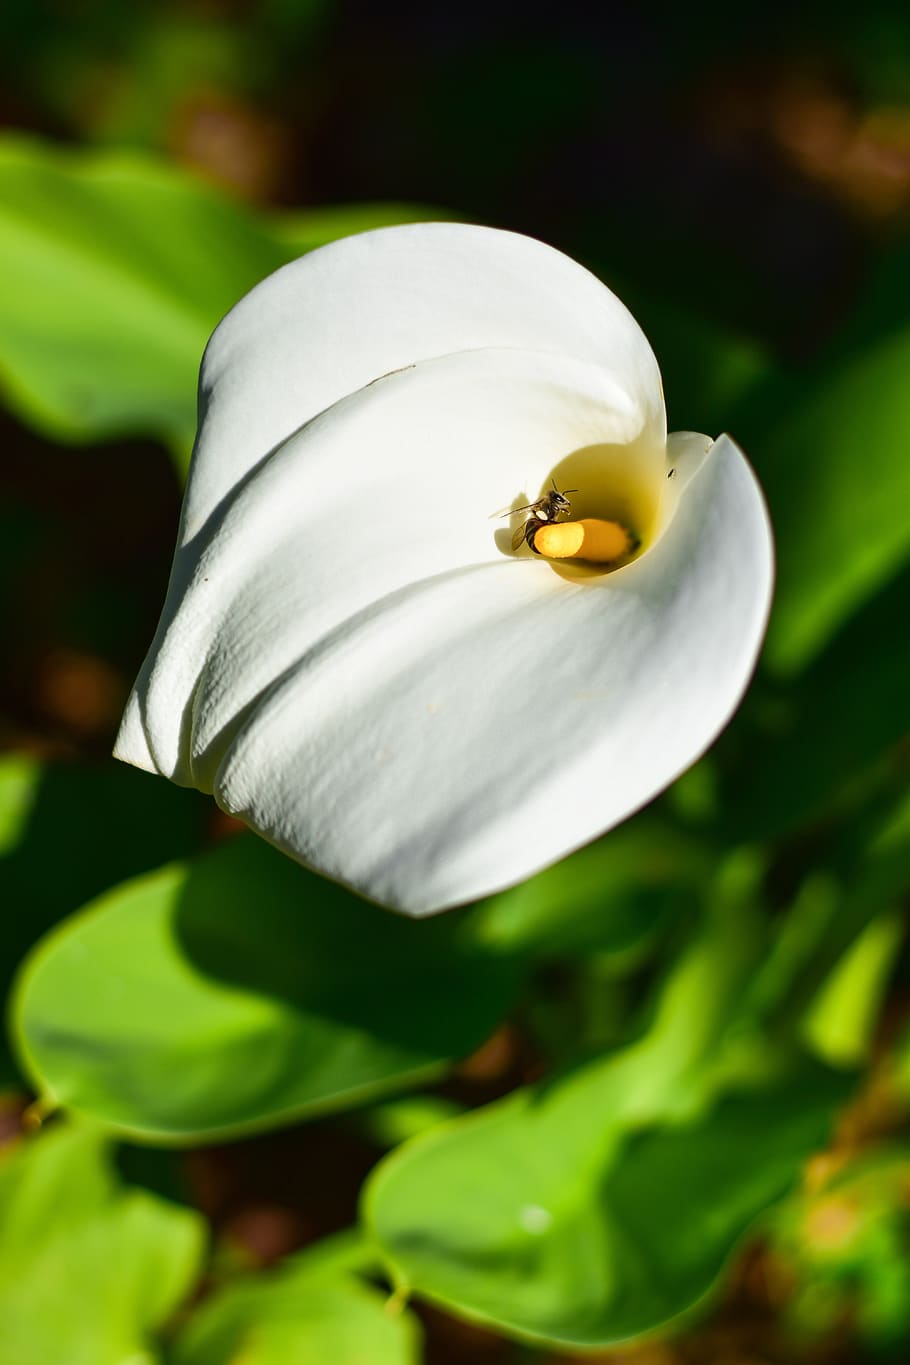 arum lily, flower, leaf, nature, bee, bloom, insect, environment